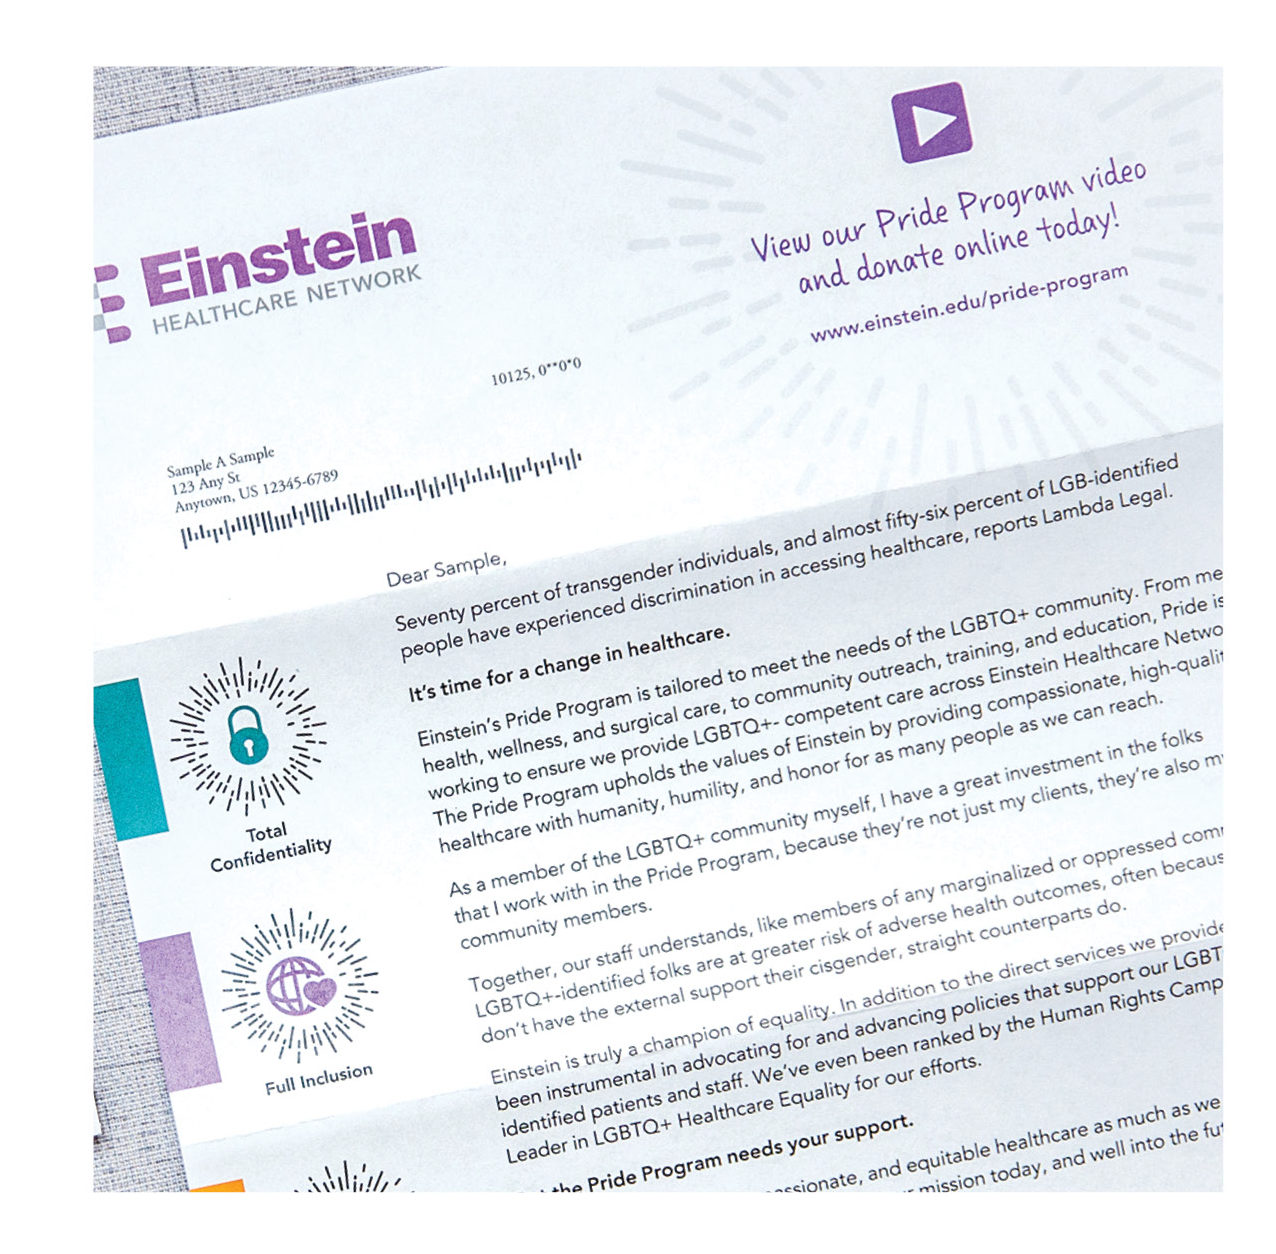 einstein healthcare network appeal letter with variable data